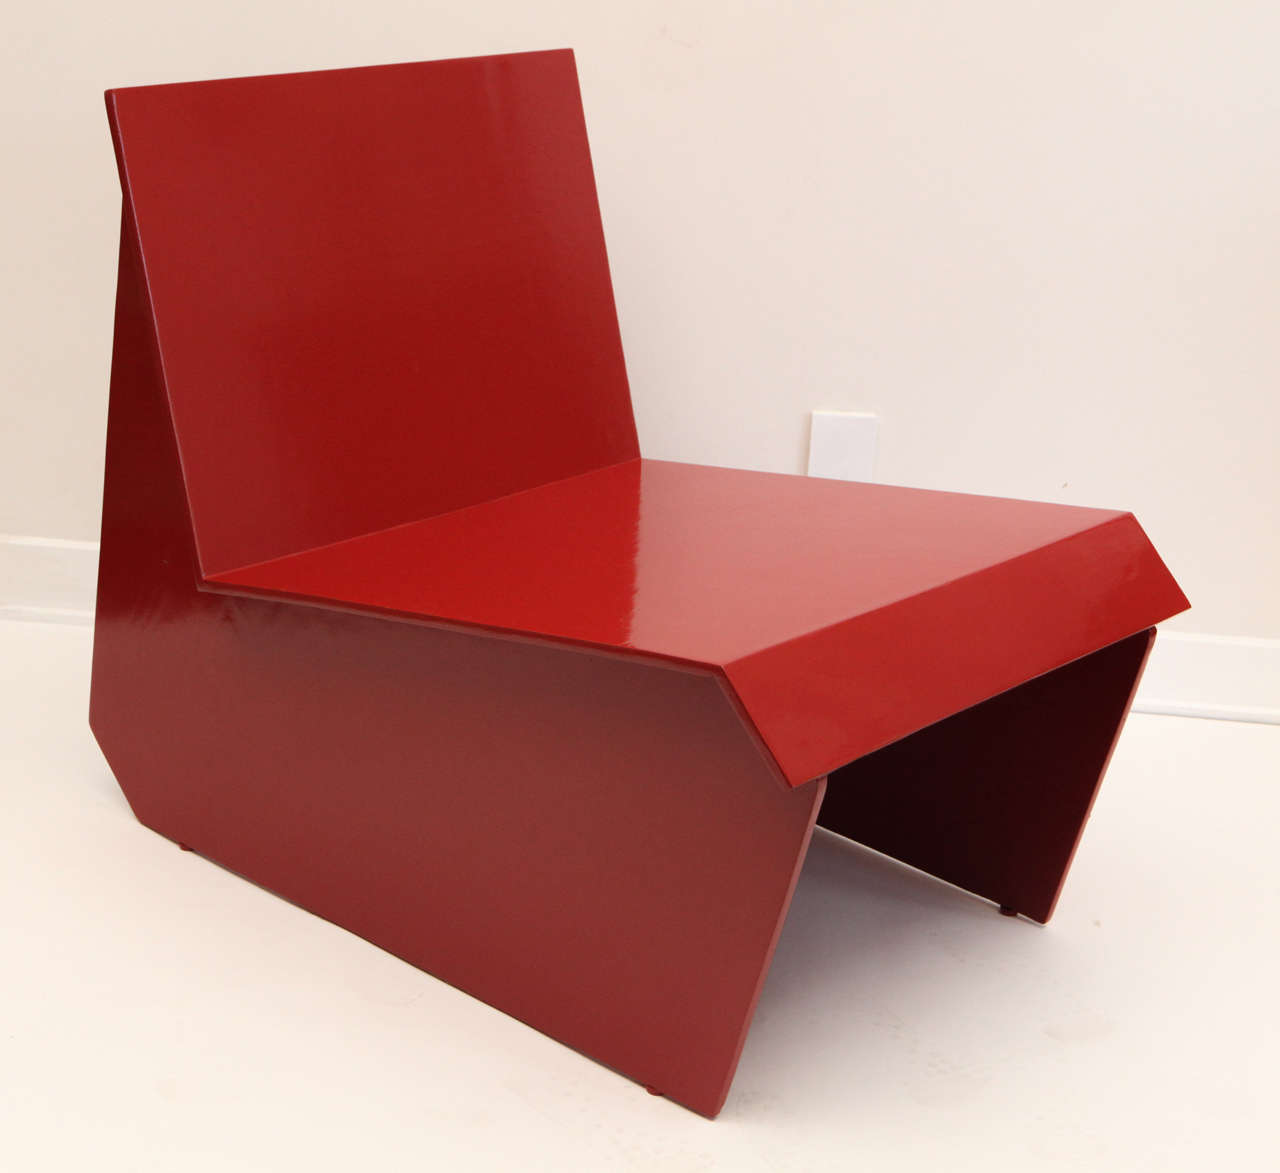 Vintage architectural lounge chair, after Frank Lloyd Wright, recalling his designs for the Auldbrass Plantation in South Carolina, c. 1939.  Recently restored in the original deep red lacquered finish.